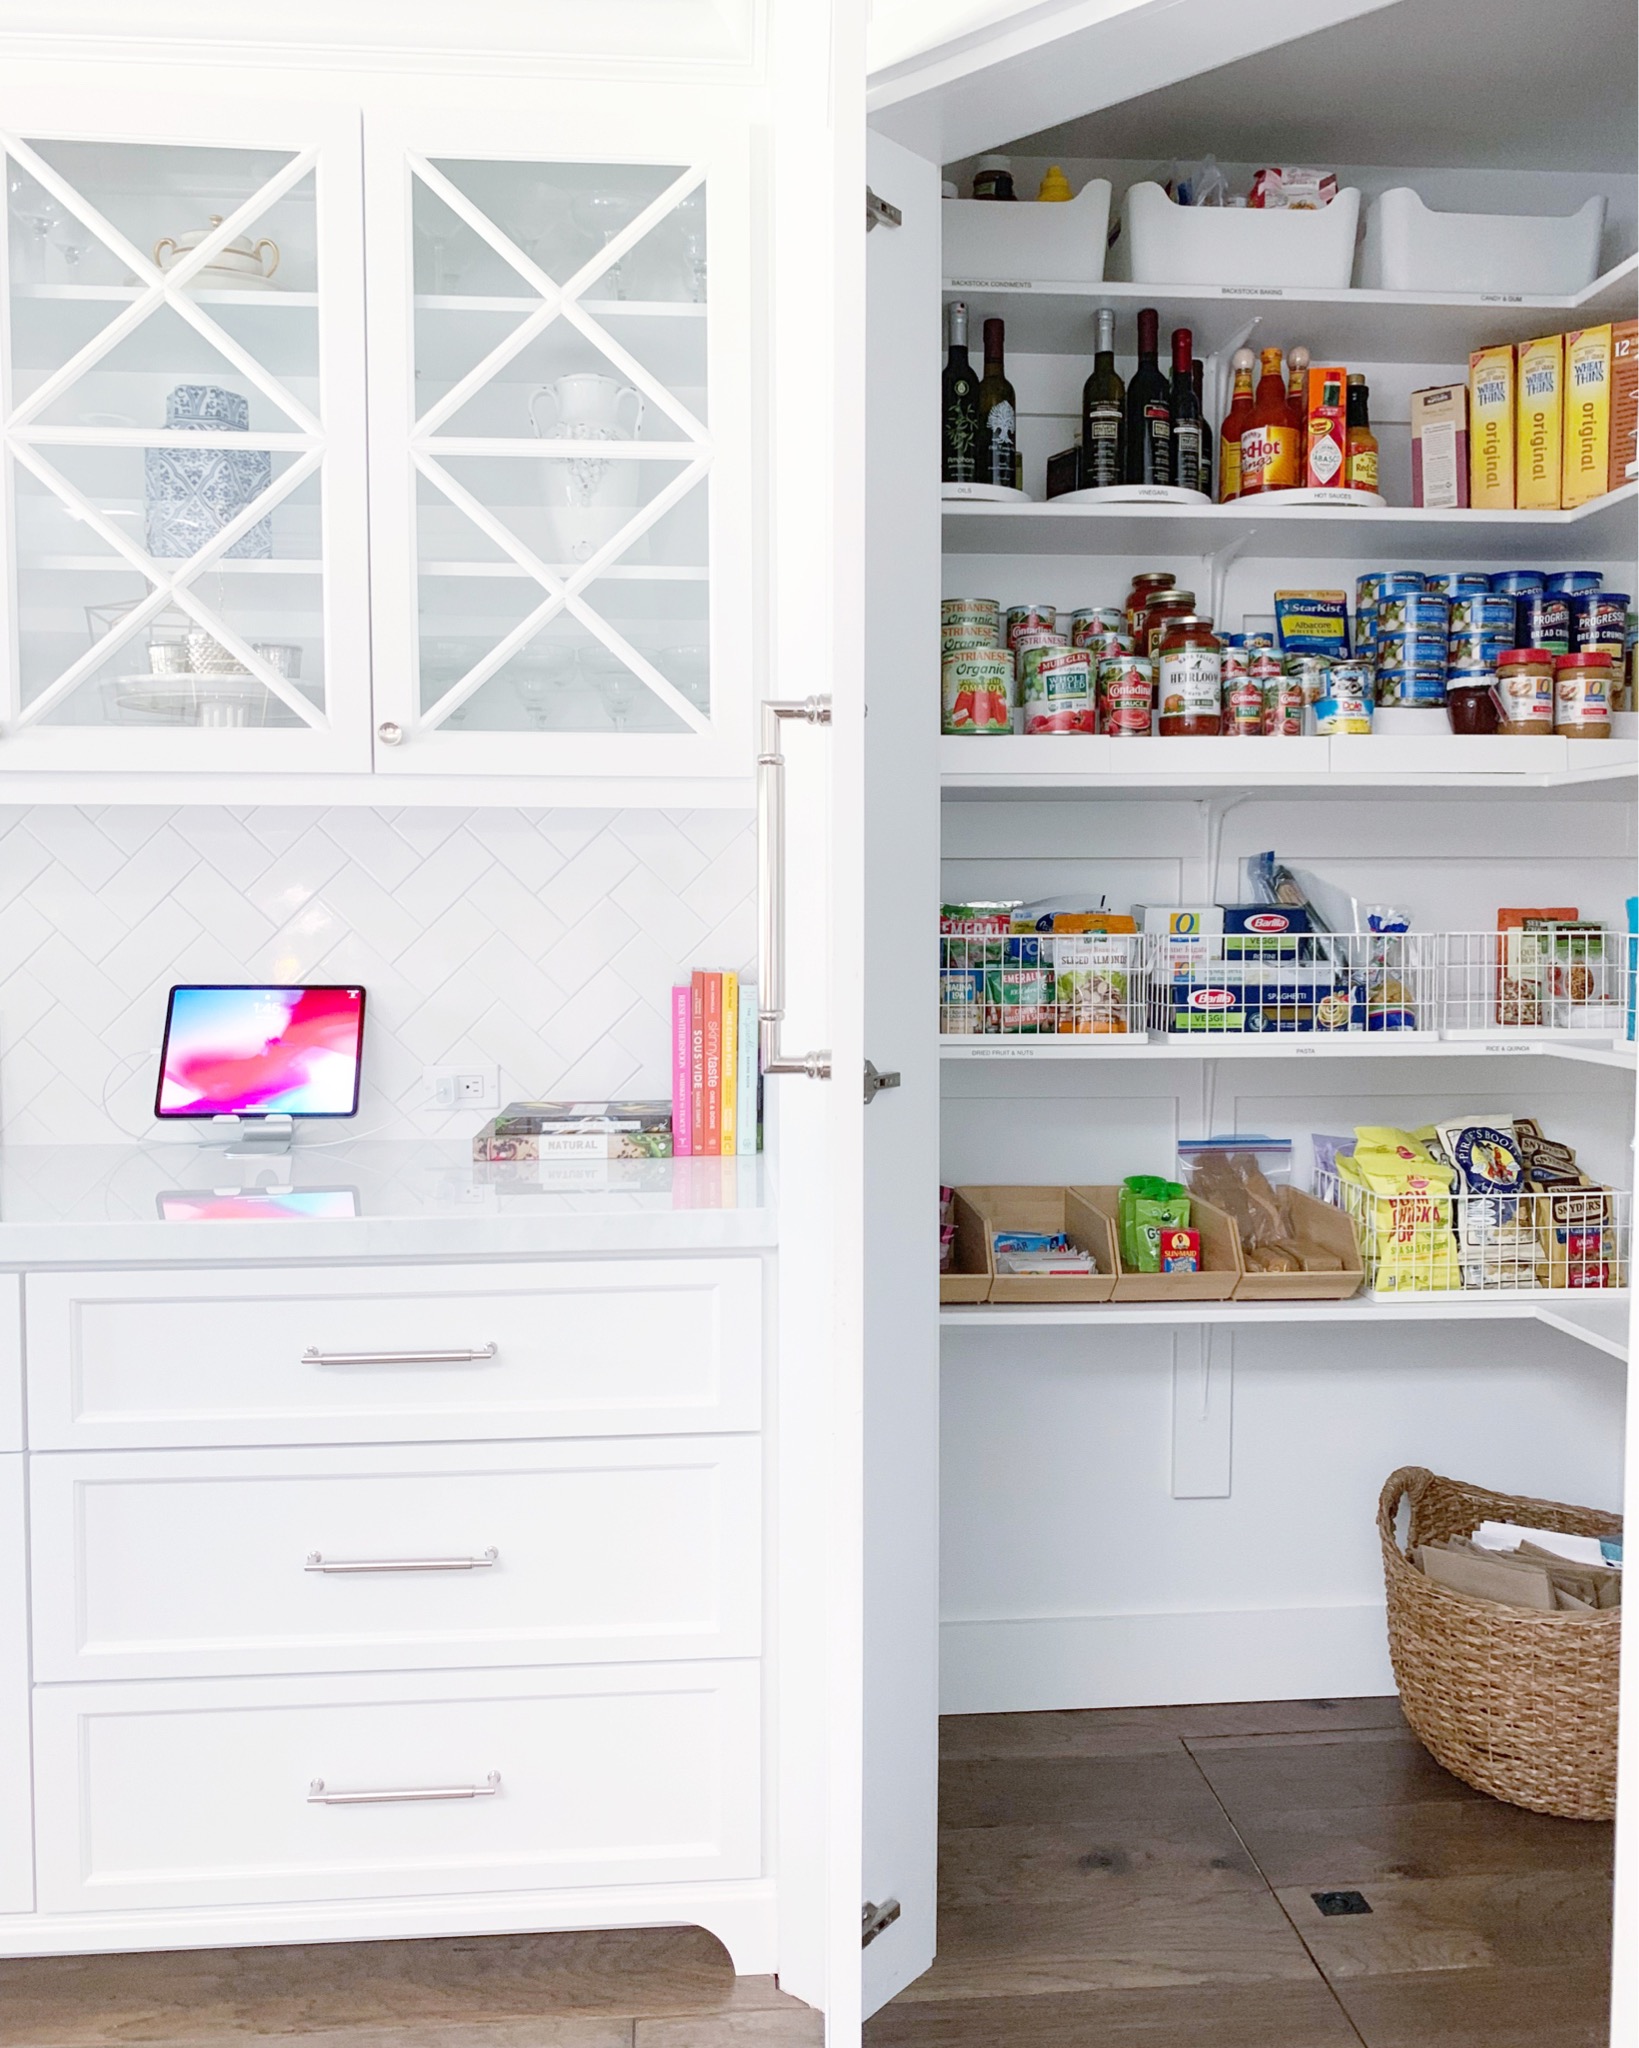 https://simplyorganized.me/wp-content/uploads/2019/06/beautiful-white-pantry-by-simply-organized.jpg